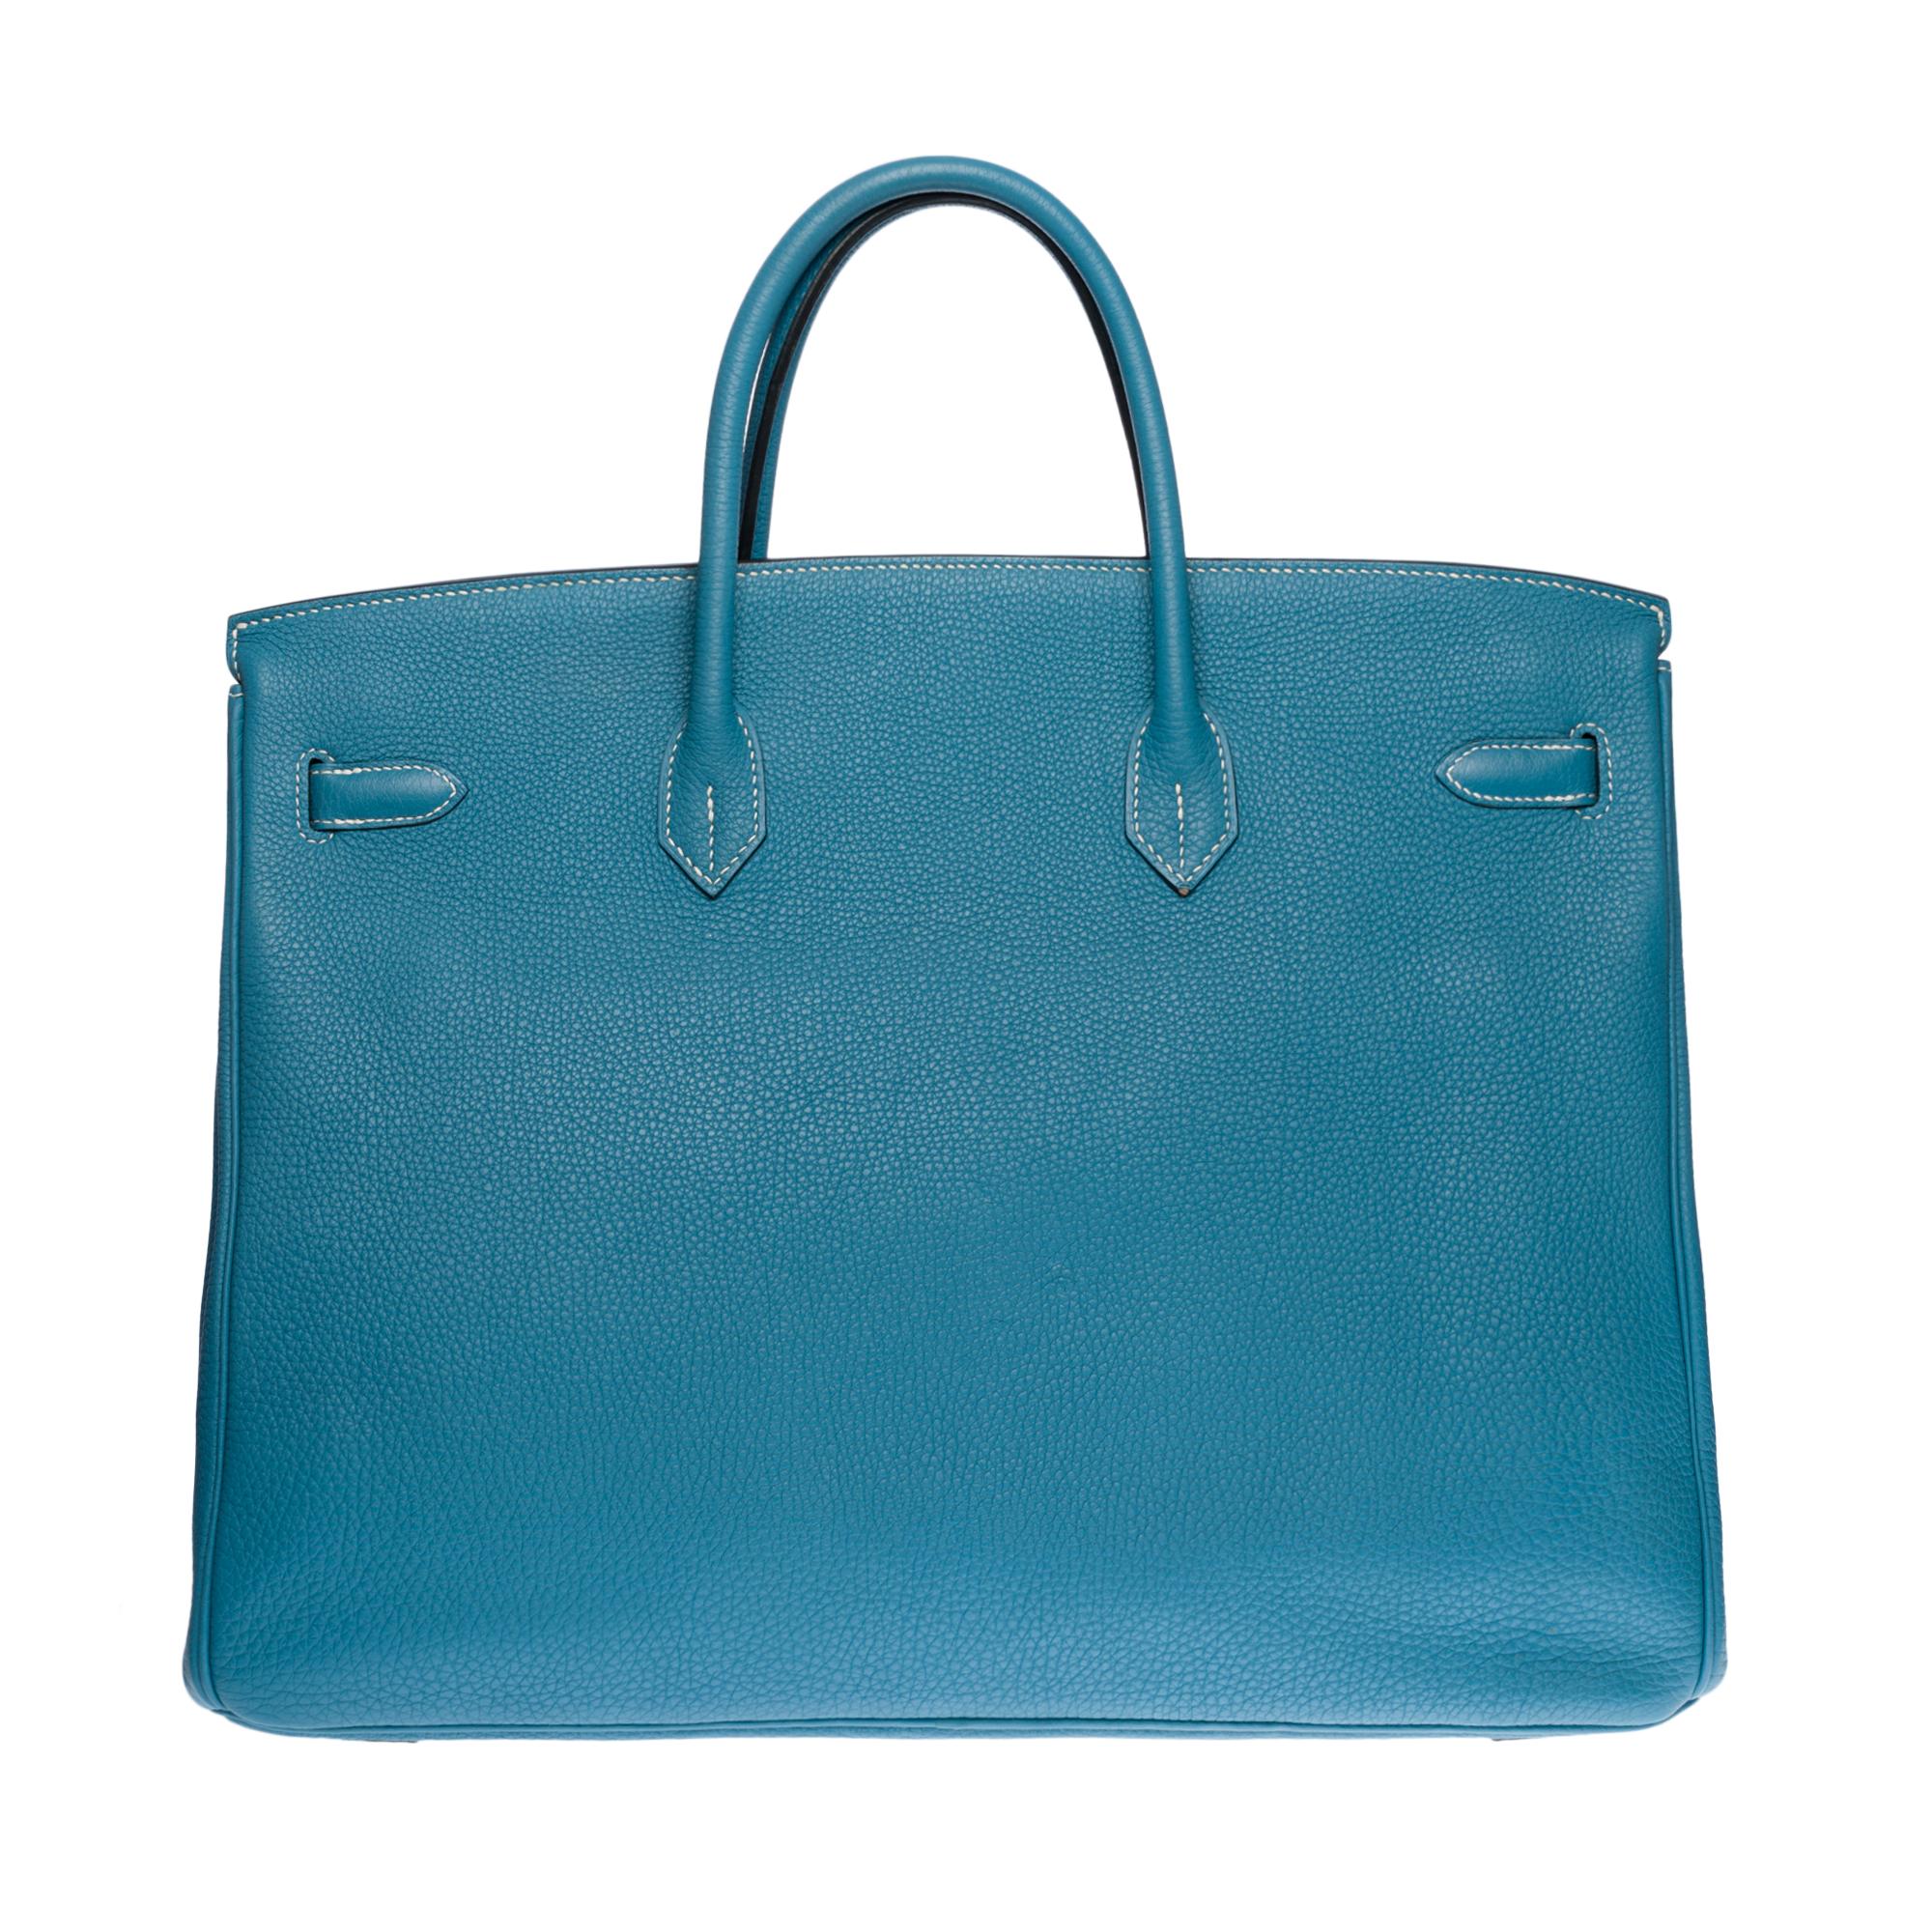 Beautiful Hermes Birkin 40 cm Leather Blue Togo Jeans with White Stitching, Palladium Silver Metal hardware, Double Blue Leather Handle for Hand Wear

Flap closure
Inner lining in blue leather, one zippered pocket, one patch pocket
Signature: